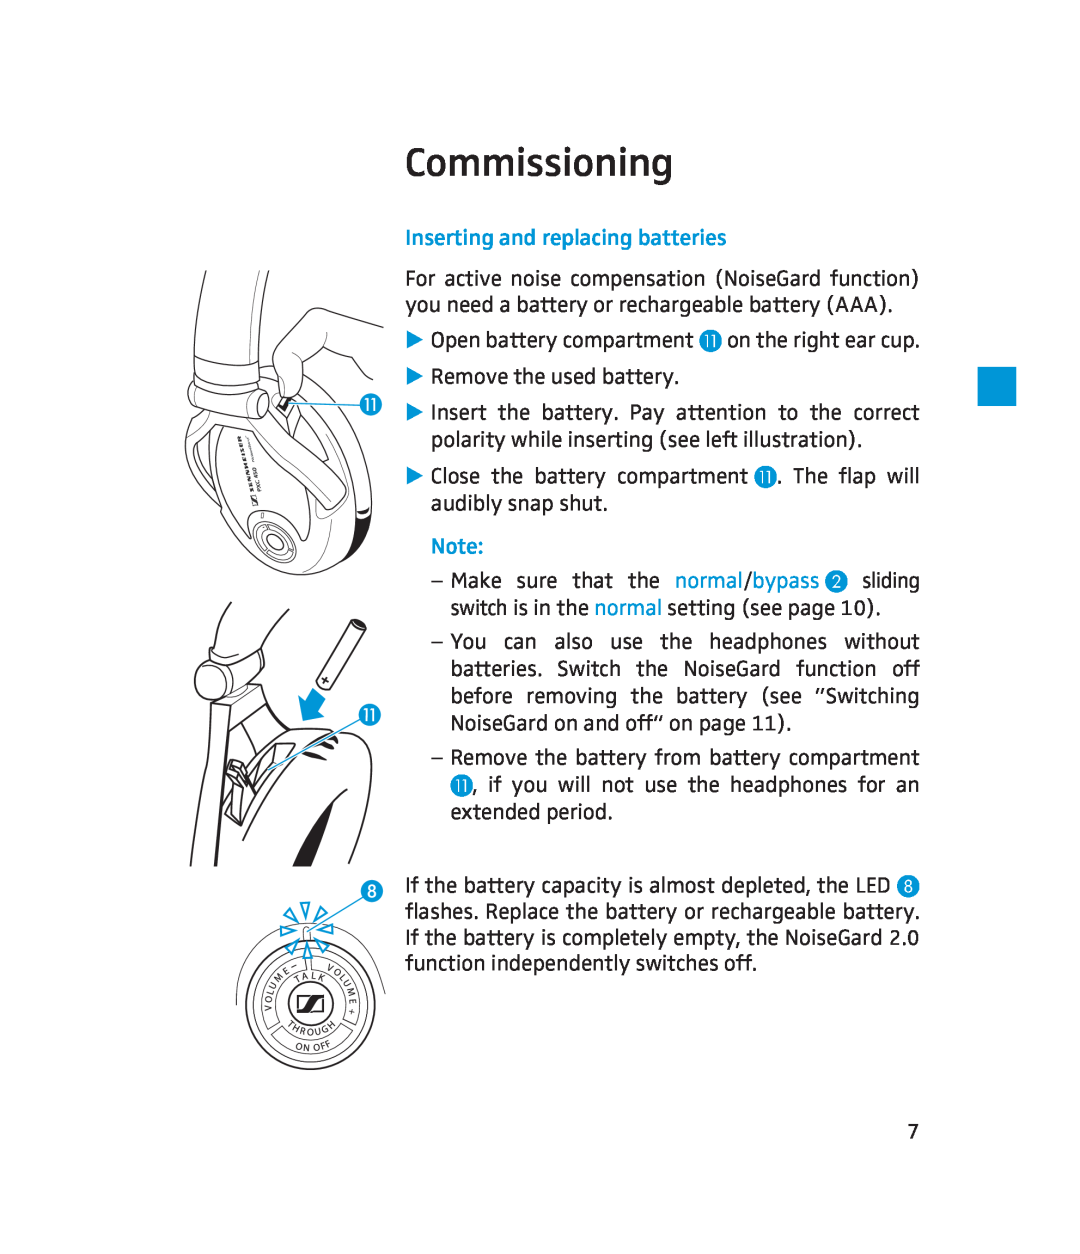 Sennheiser PXC 450 instruction manual Commissioning, Inserting and replacing batteries, Make sure that the normal/bypass 